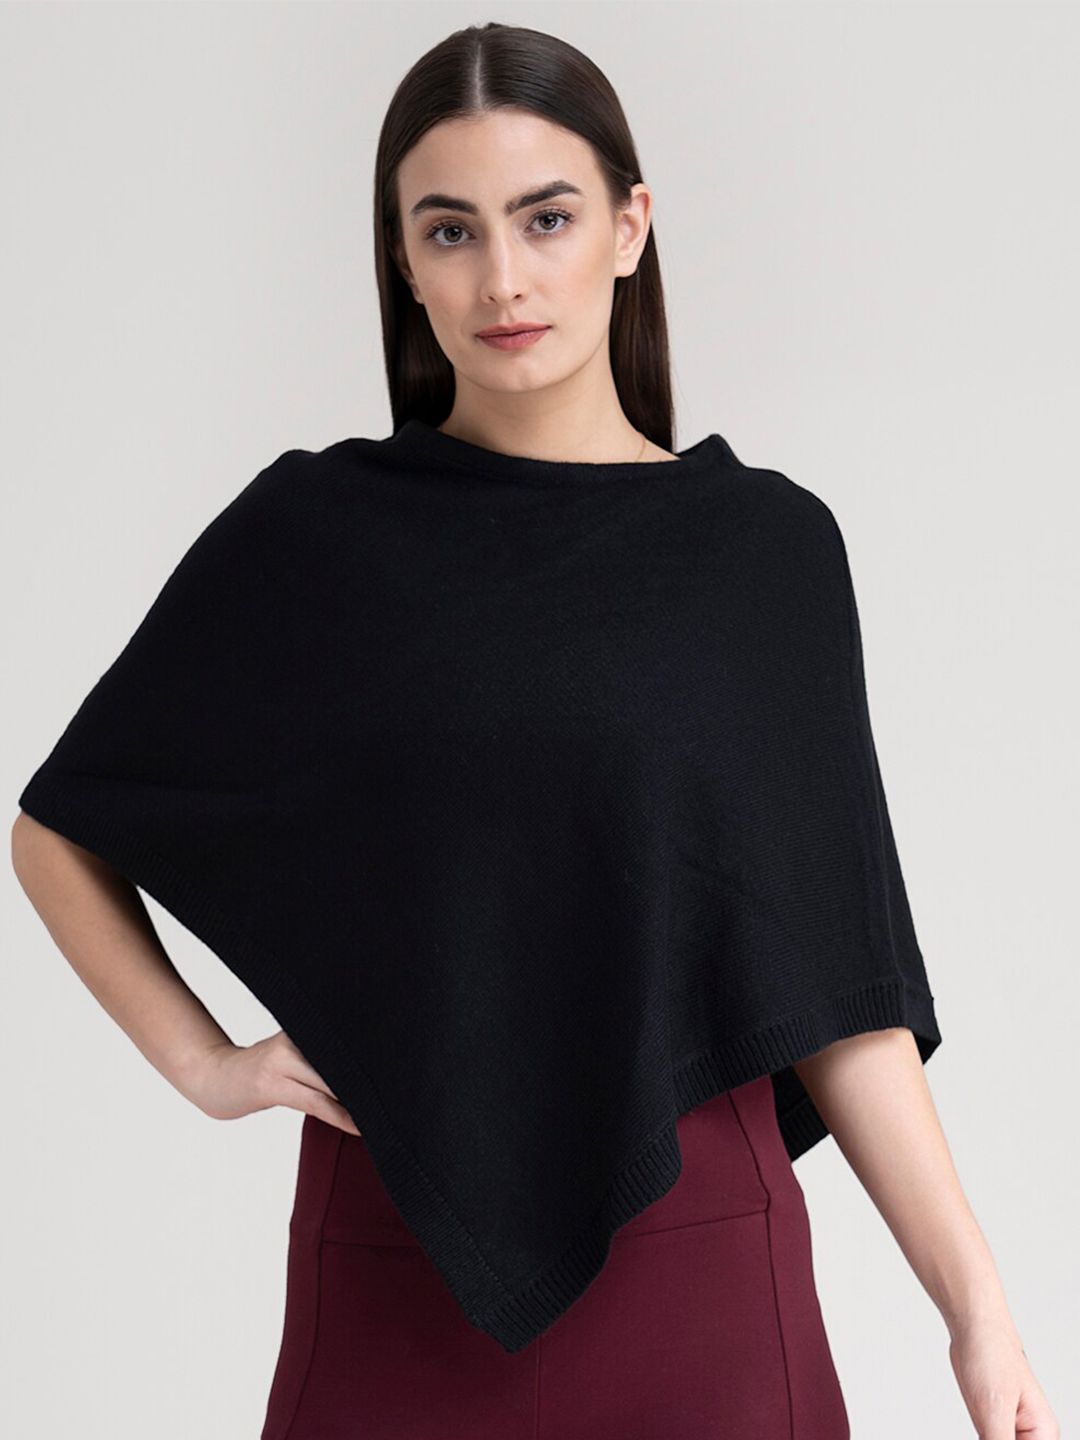 FableStreet Women Black Boat Neck Acrylic Knit Poncho Price in India